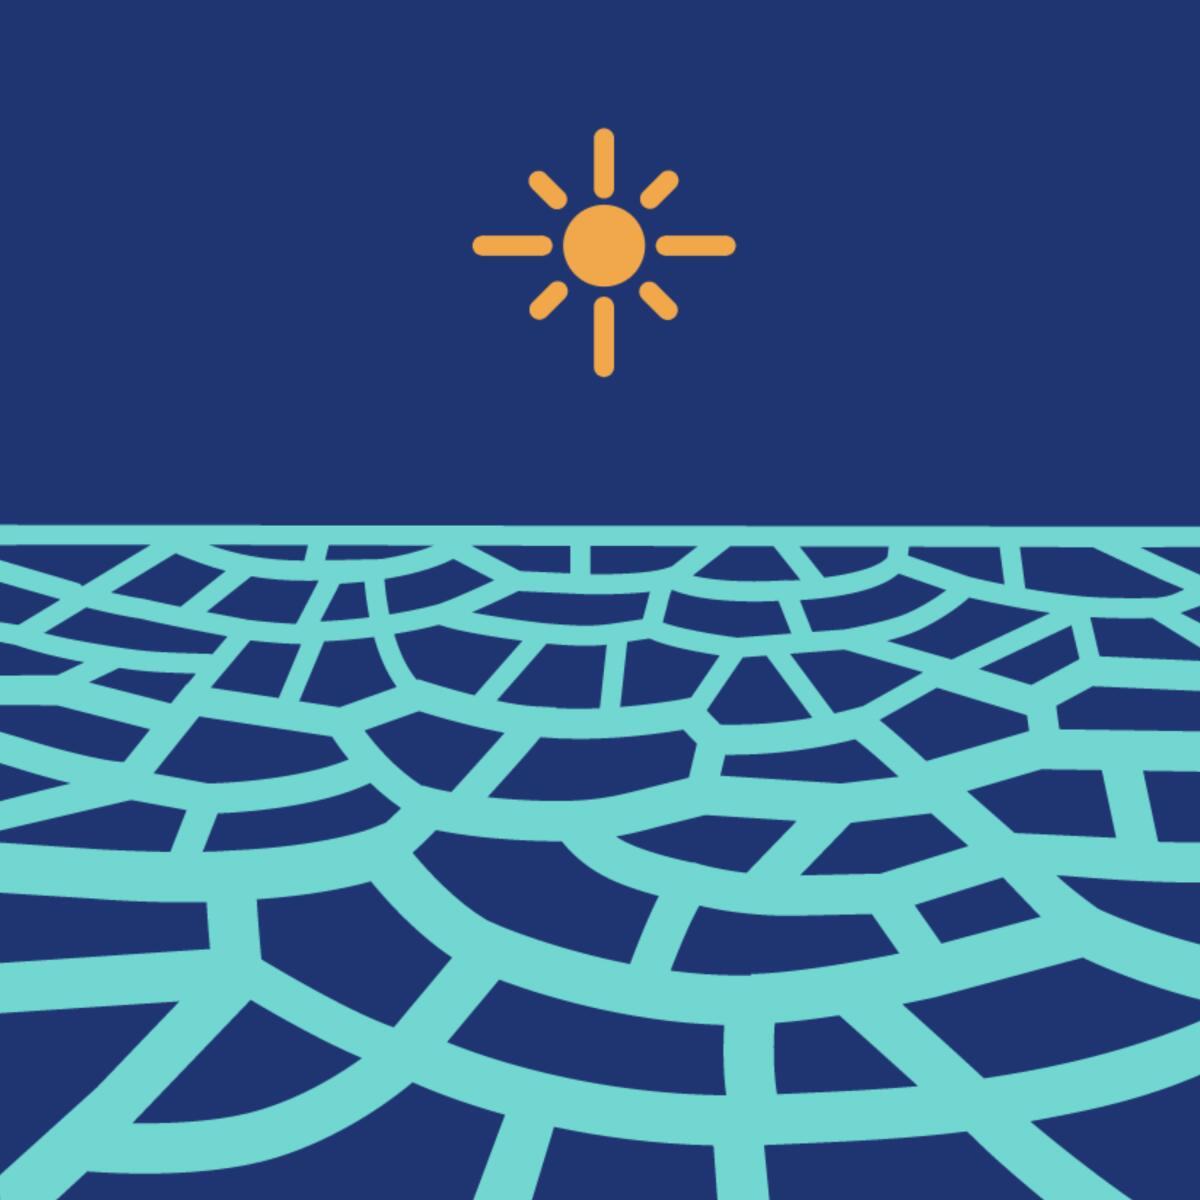 A pictogram of cracked dry land with the sun beating down.